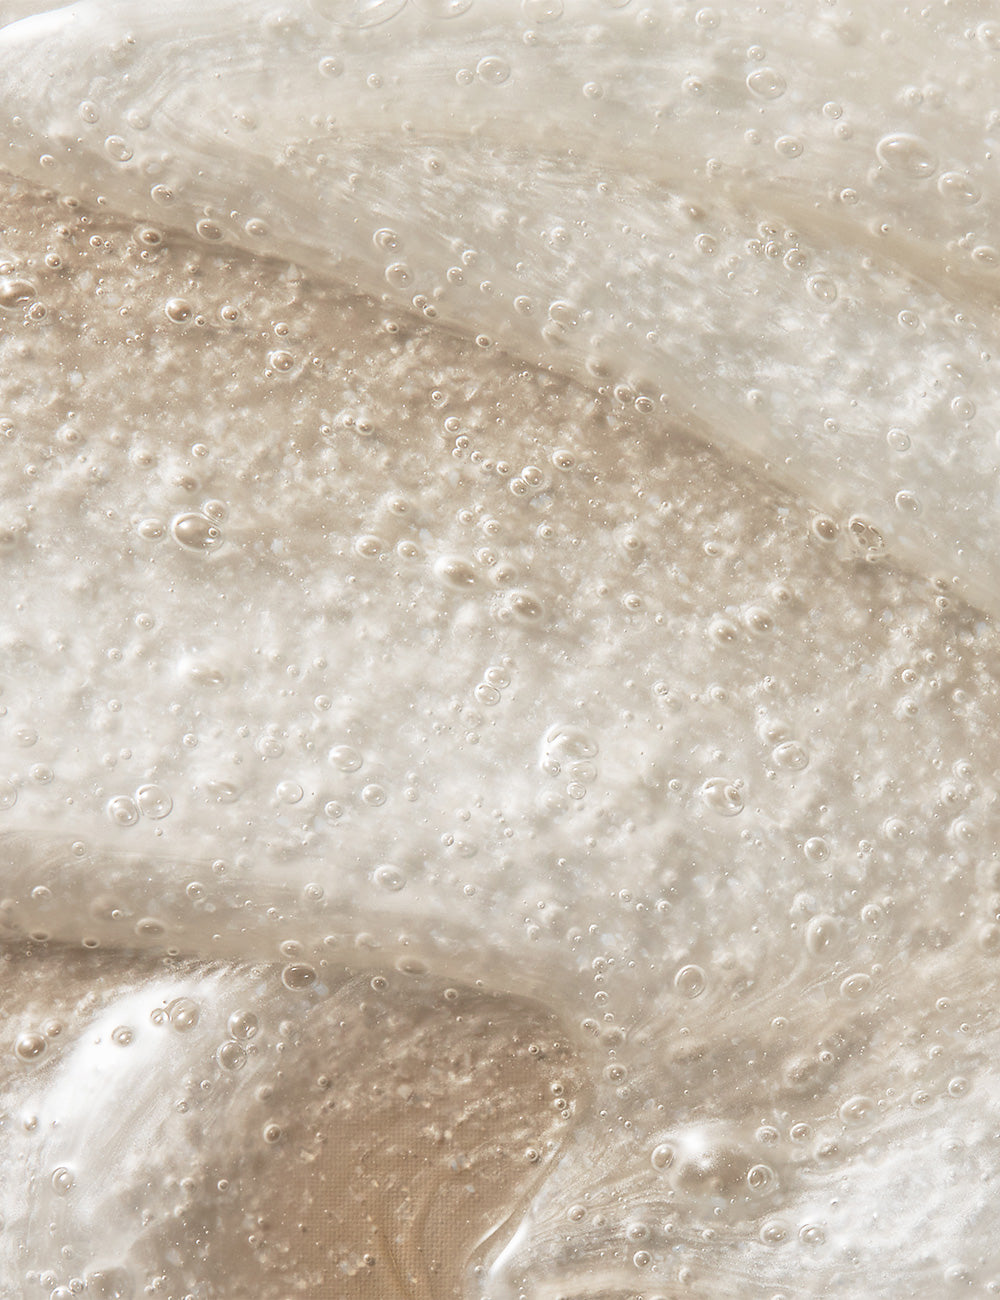 Close-up photo of exfoliator cream with small granules on a tan background.